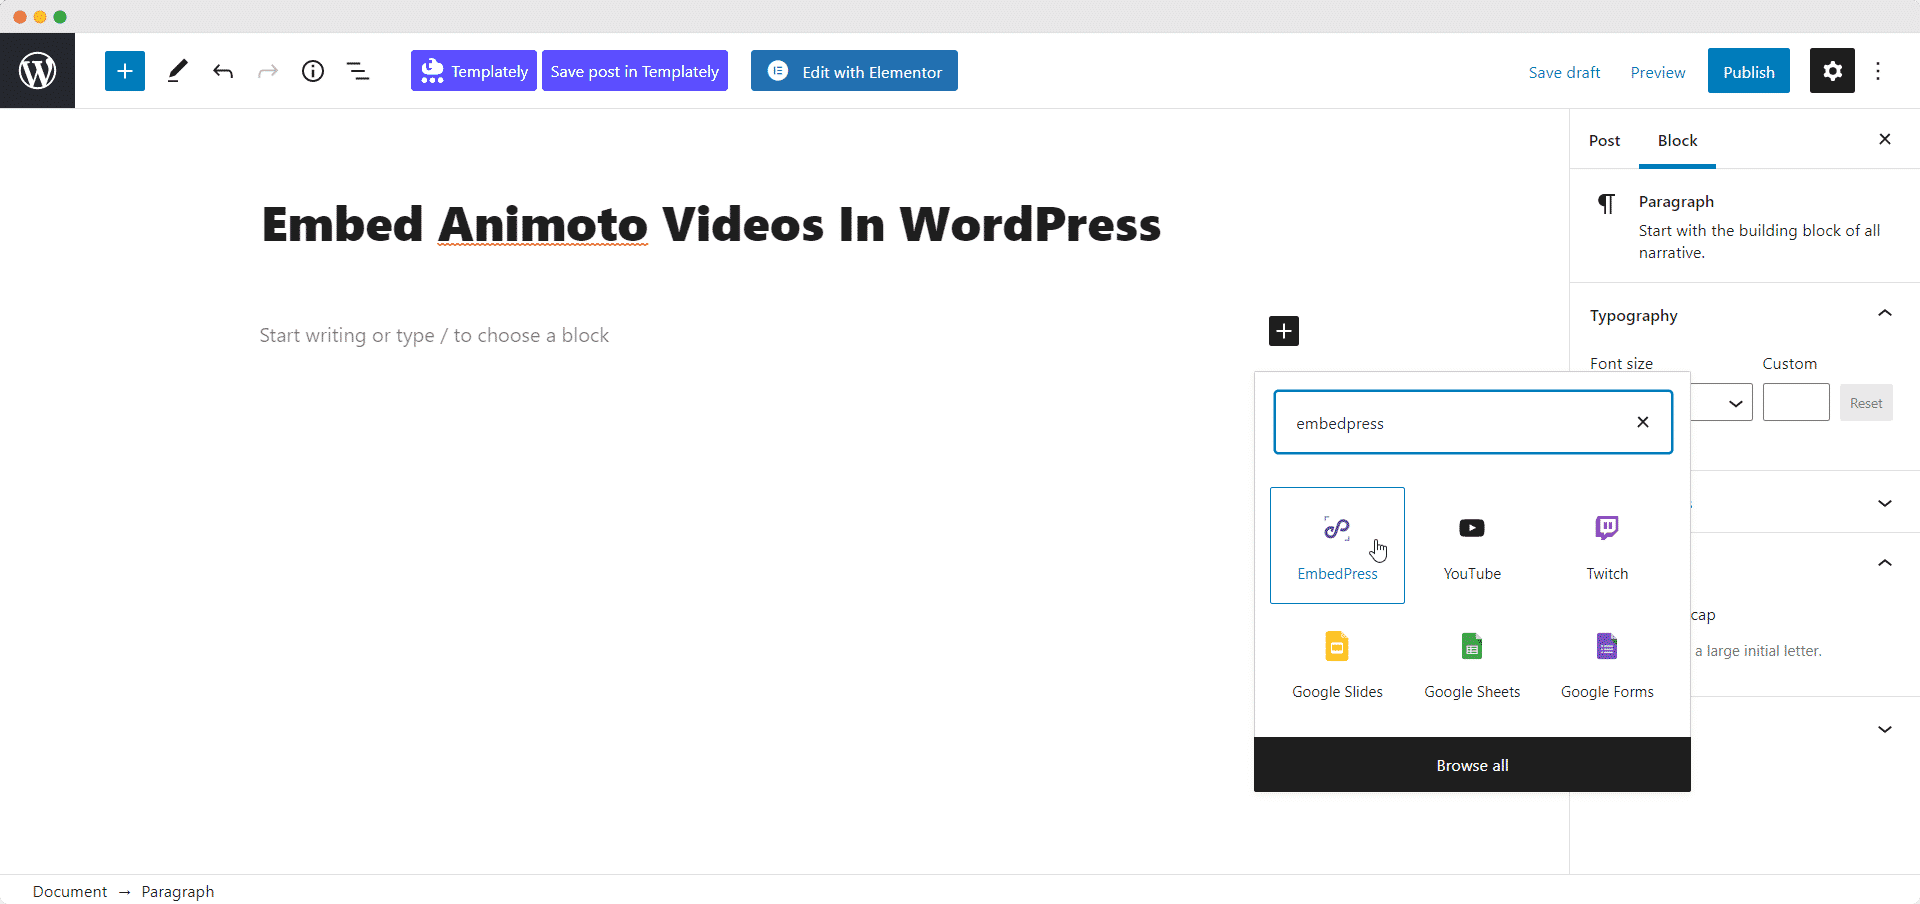 How to Embed Animoto Videos in WordPress